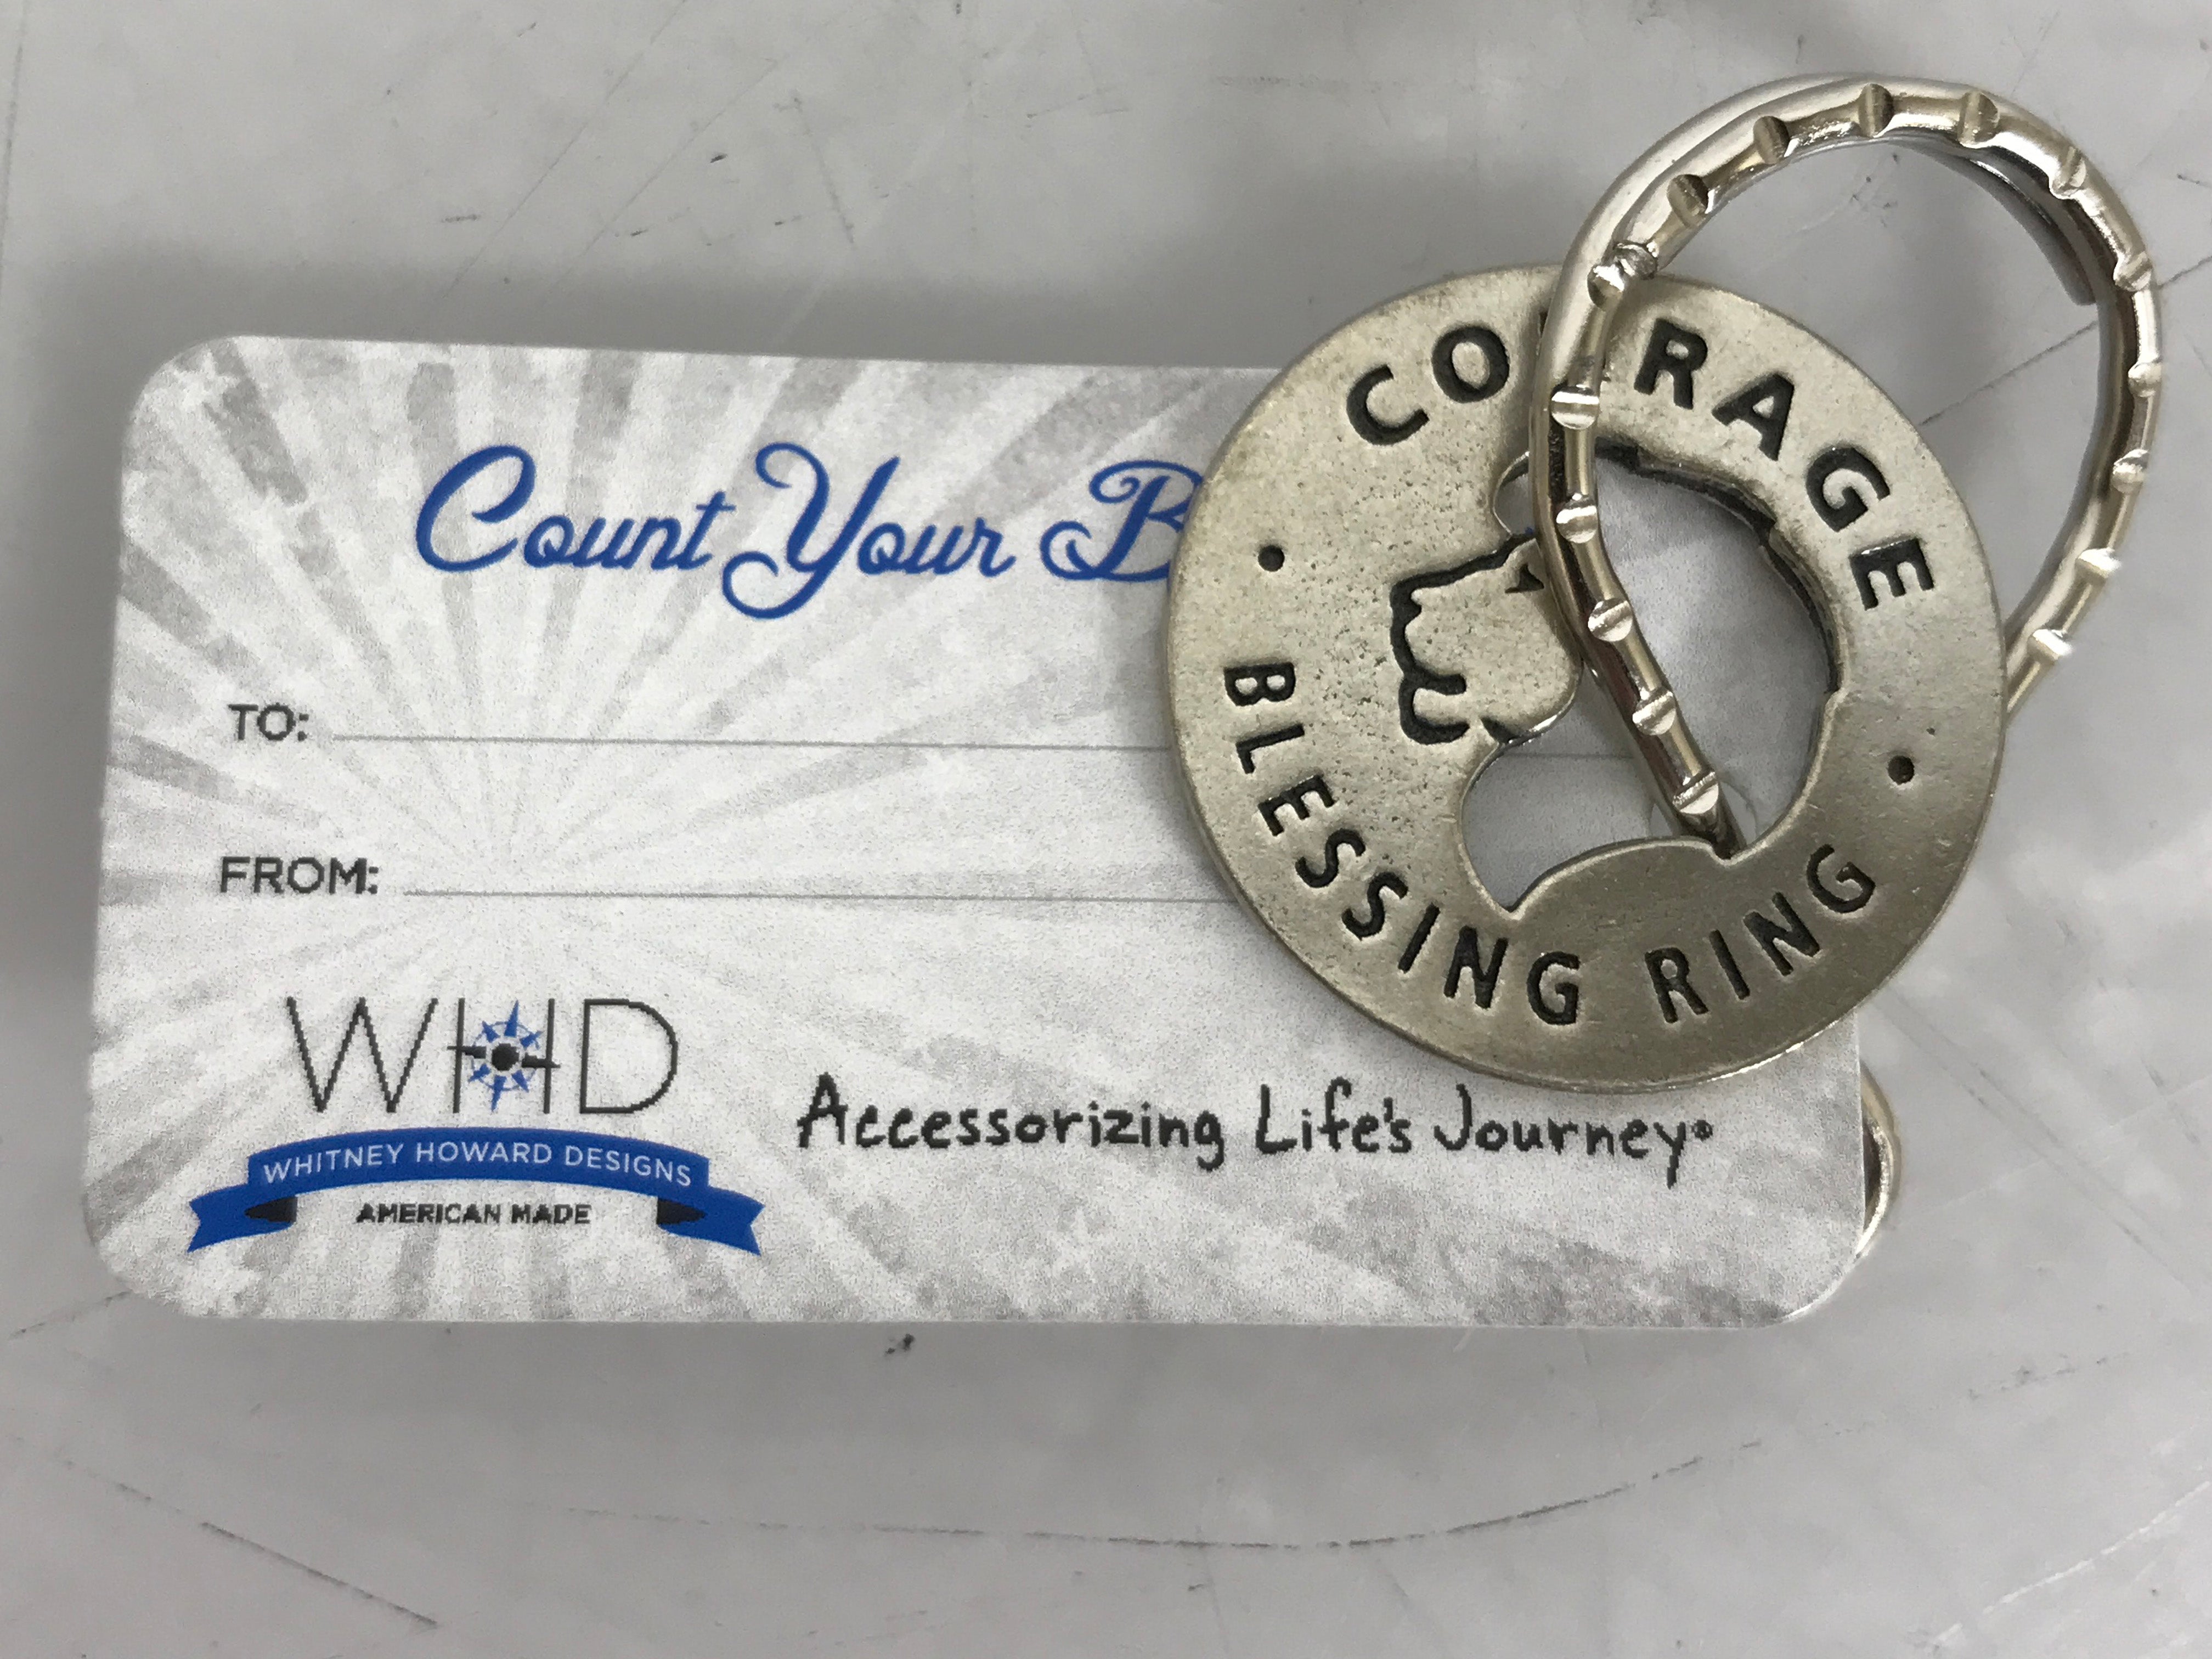 WHD BlessingRings "Courage" Keychain